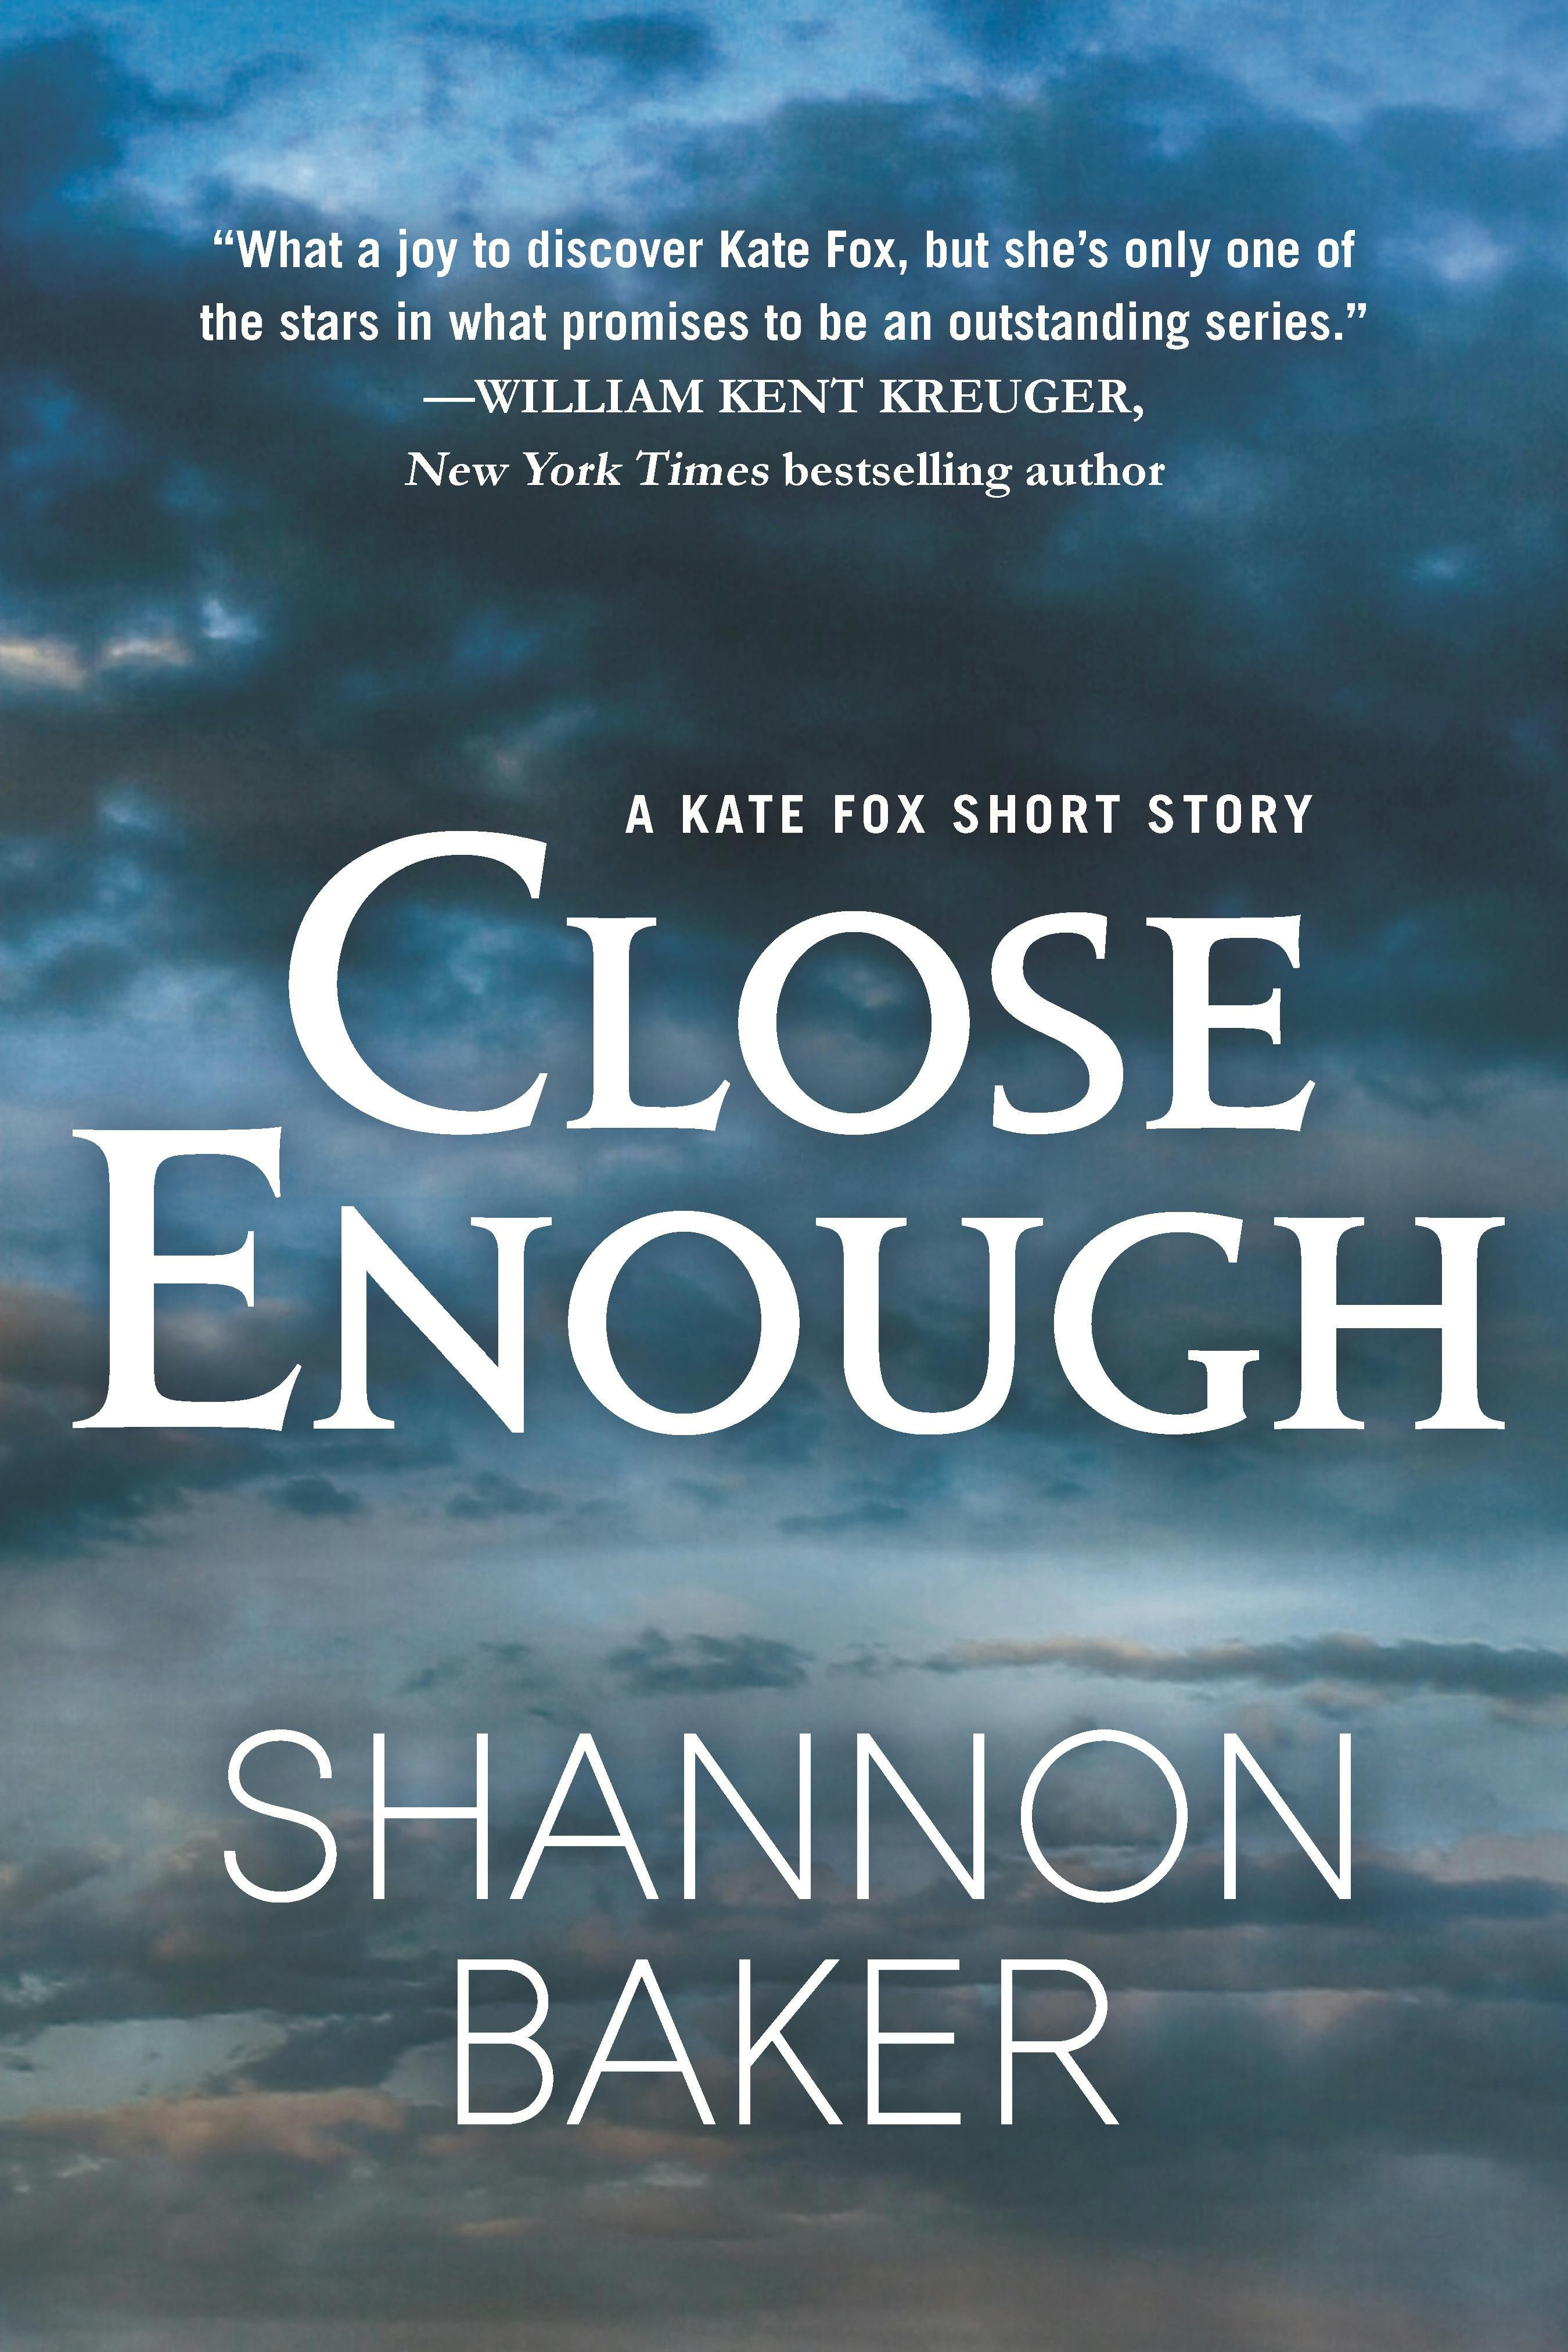 Cover for the book titled as: Close Enough